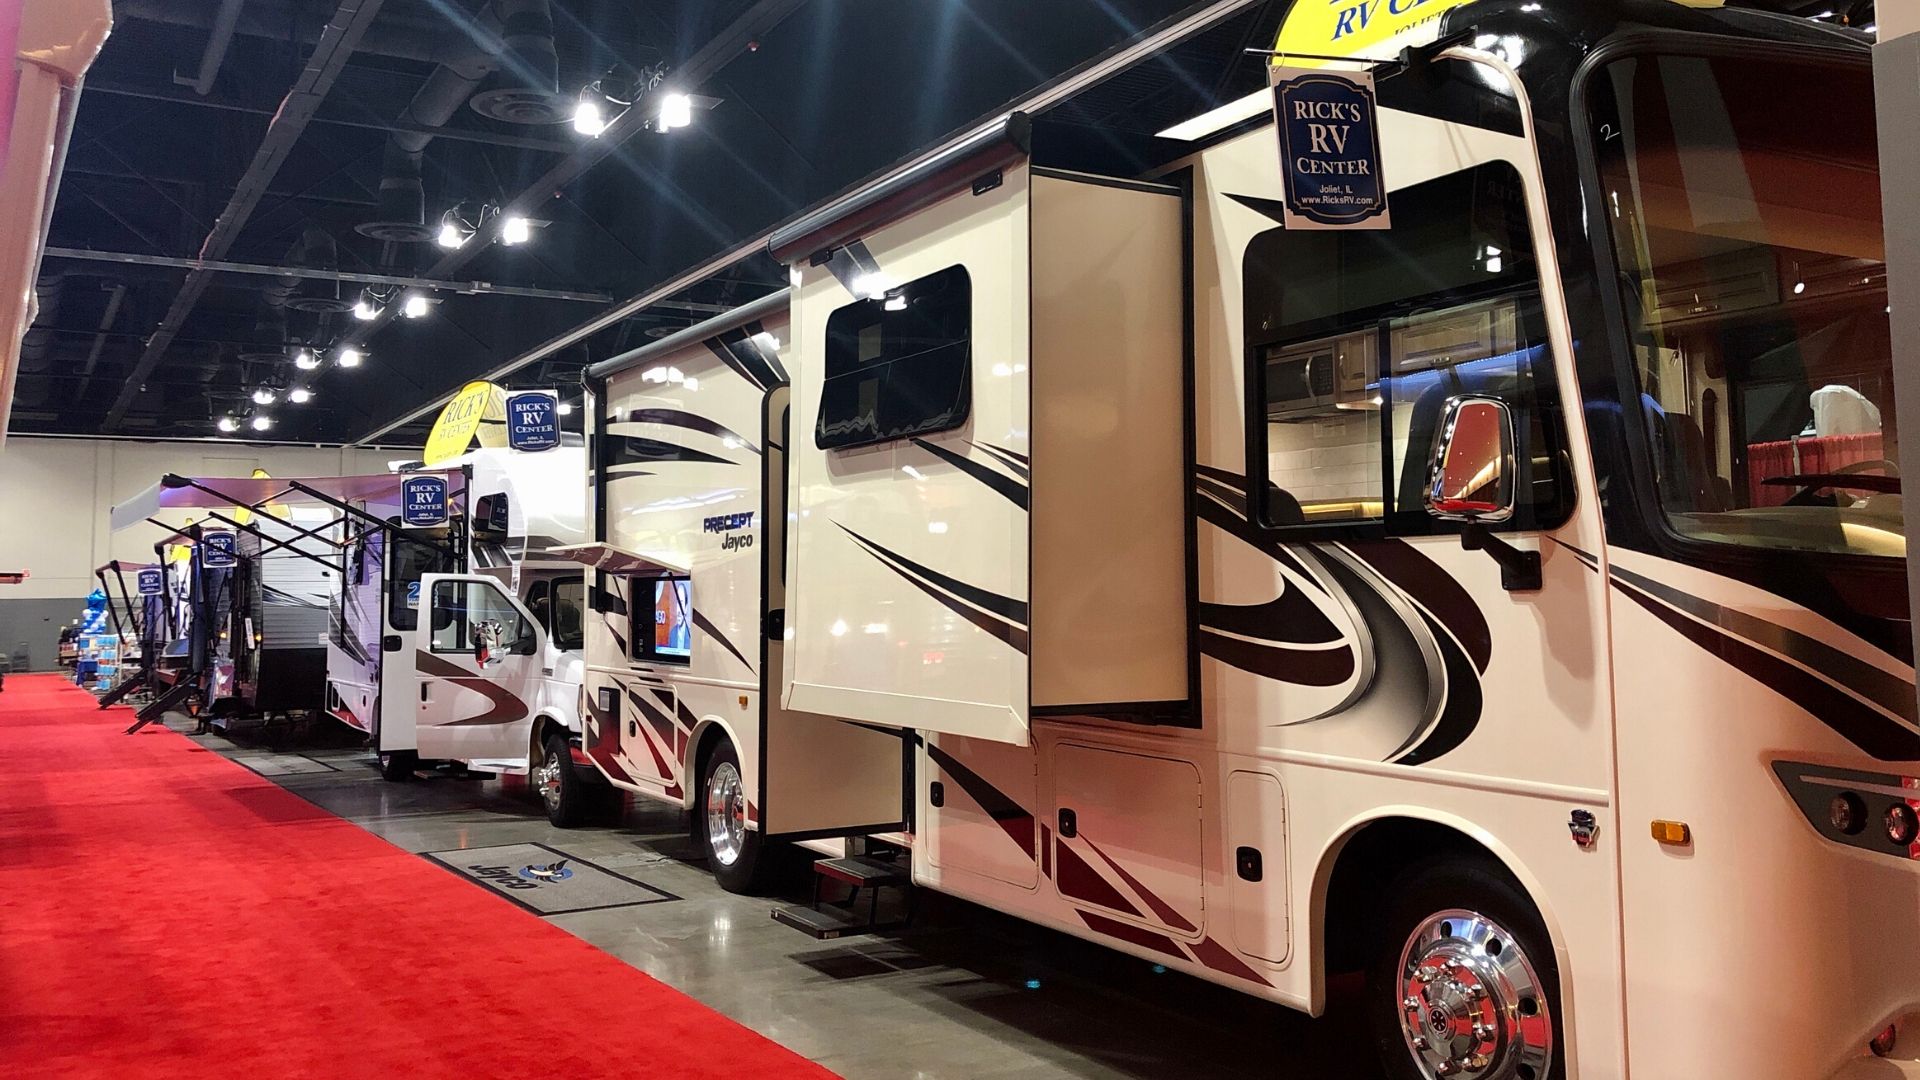 RVs lined in a row at an RV show.